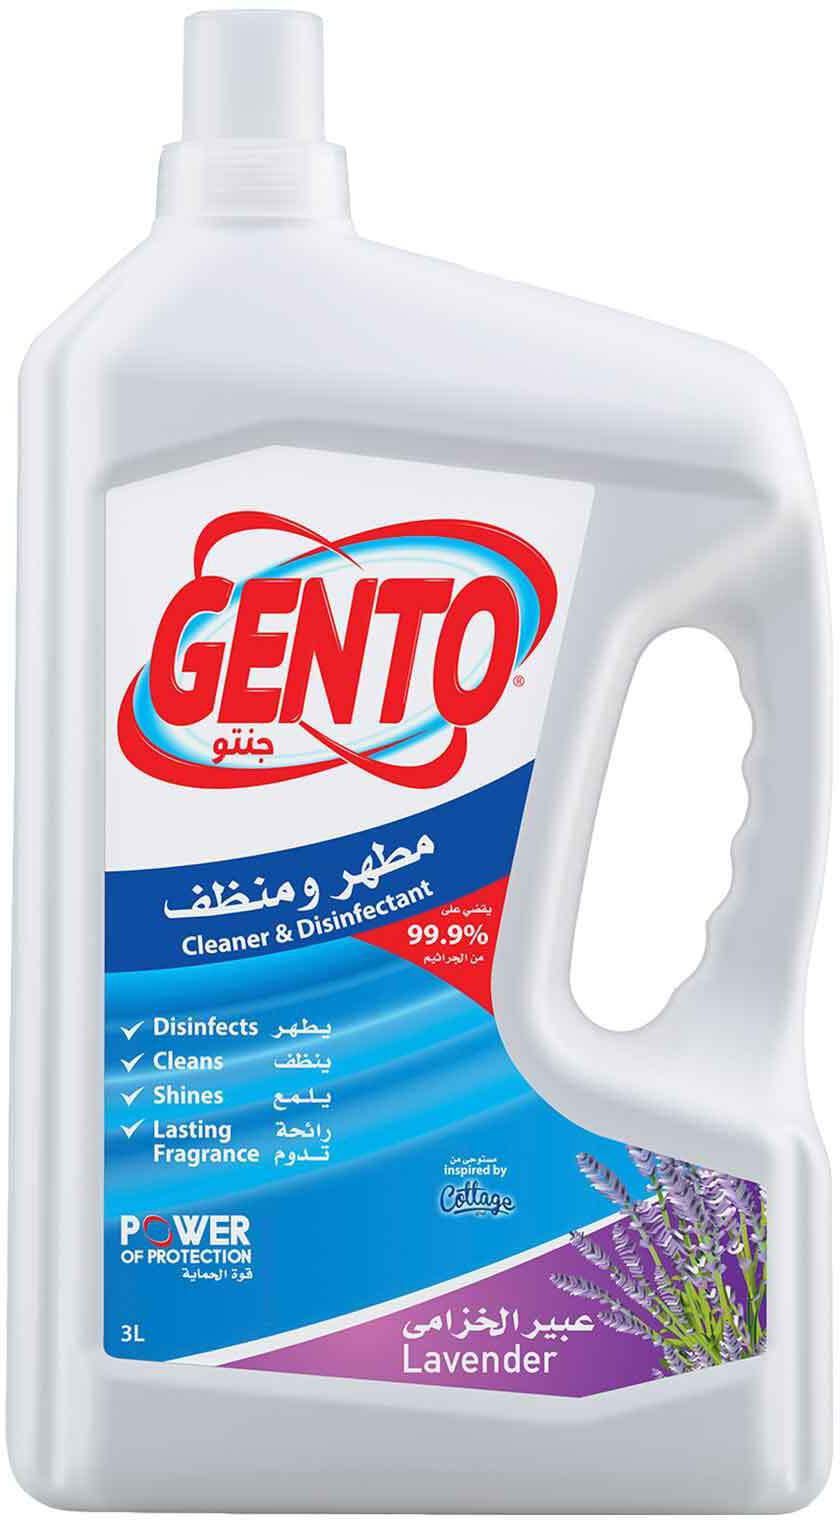 Gento cleaner and disinfectant lavender 3 L